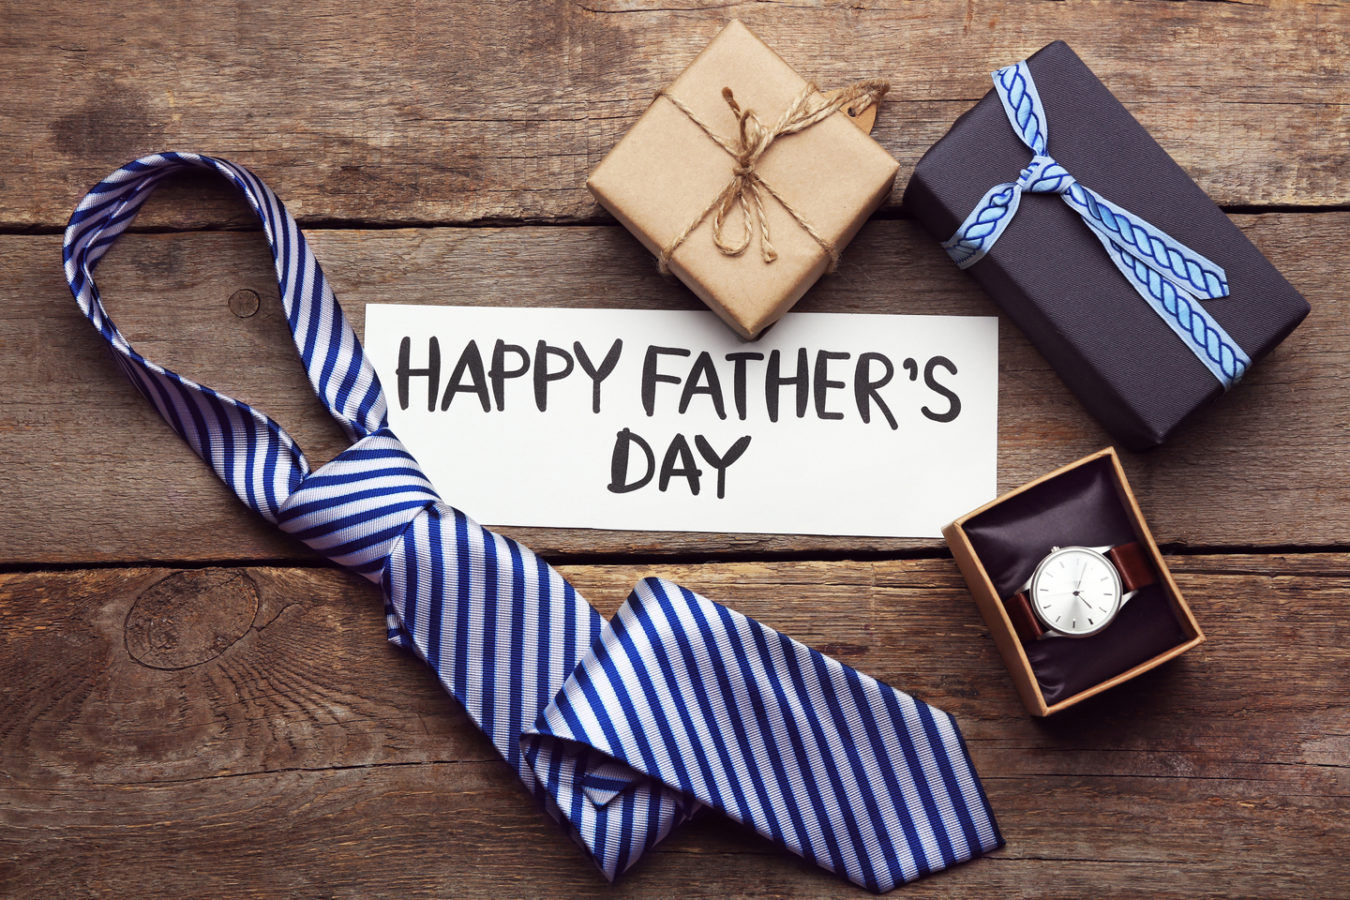 Father’s Day: Treat your dad to something special with our ultimate gifting guide